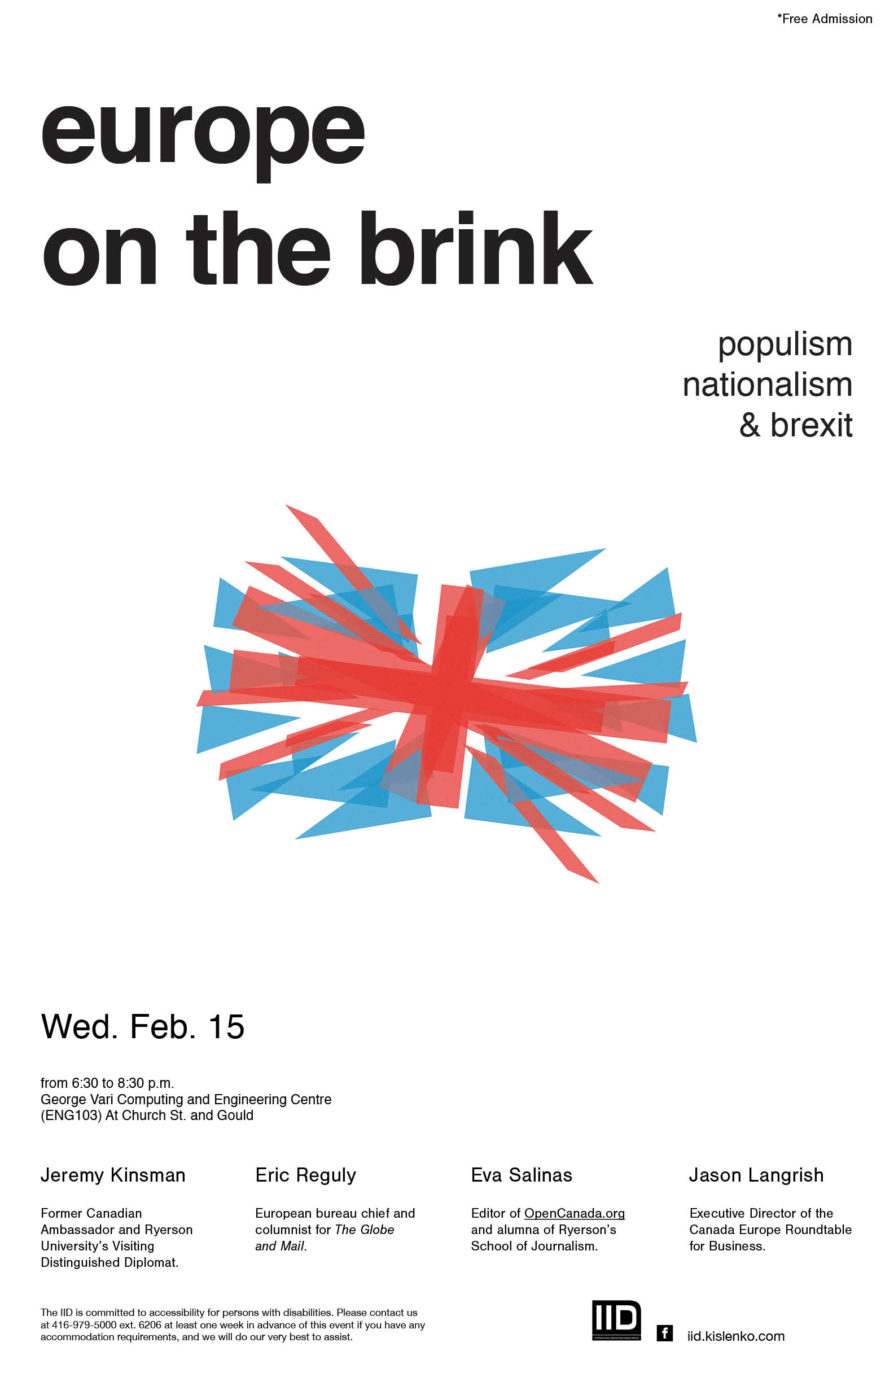 Europe on the Brink: Populism, Nationalism & Brexit – Wednesday, February 15th, 2017